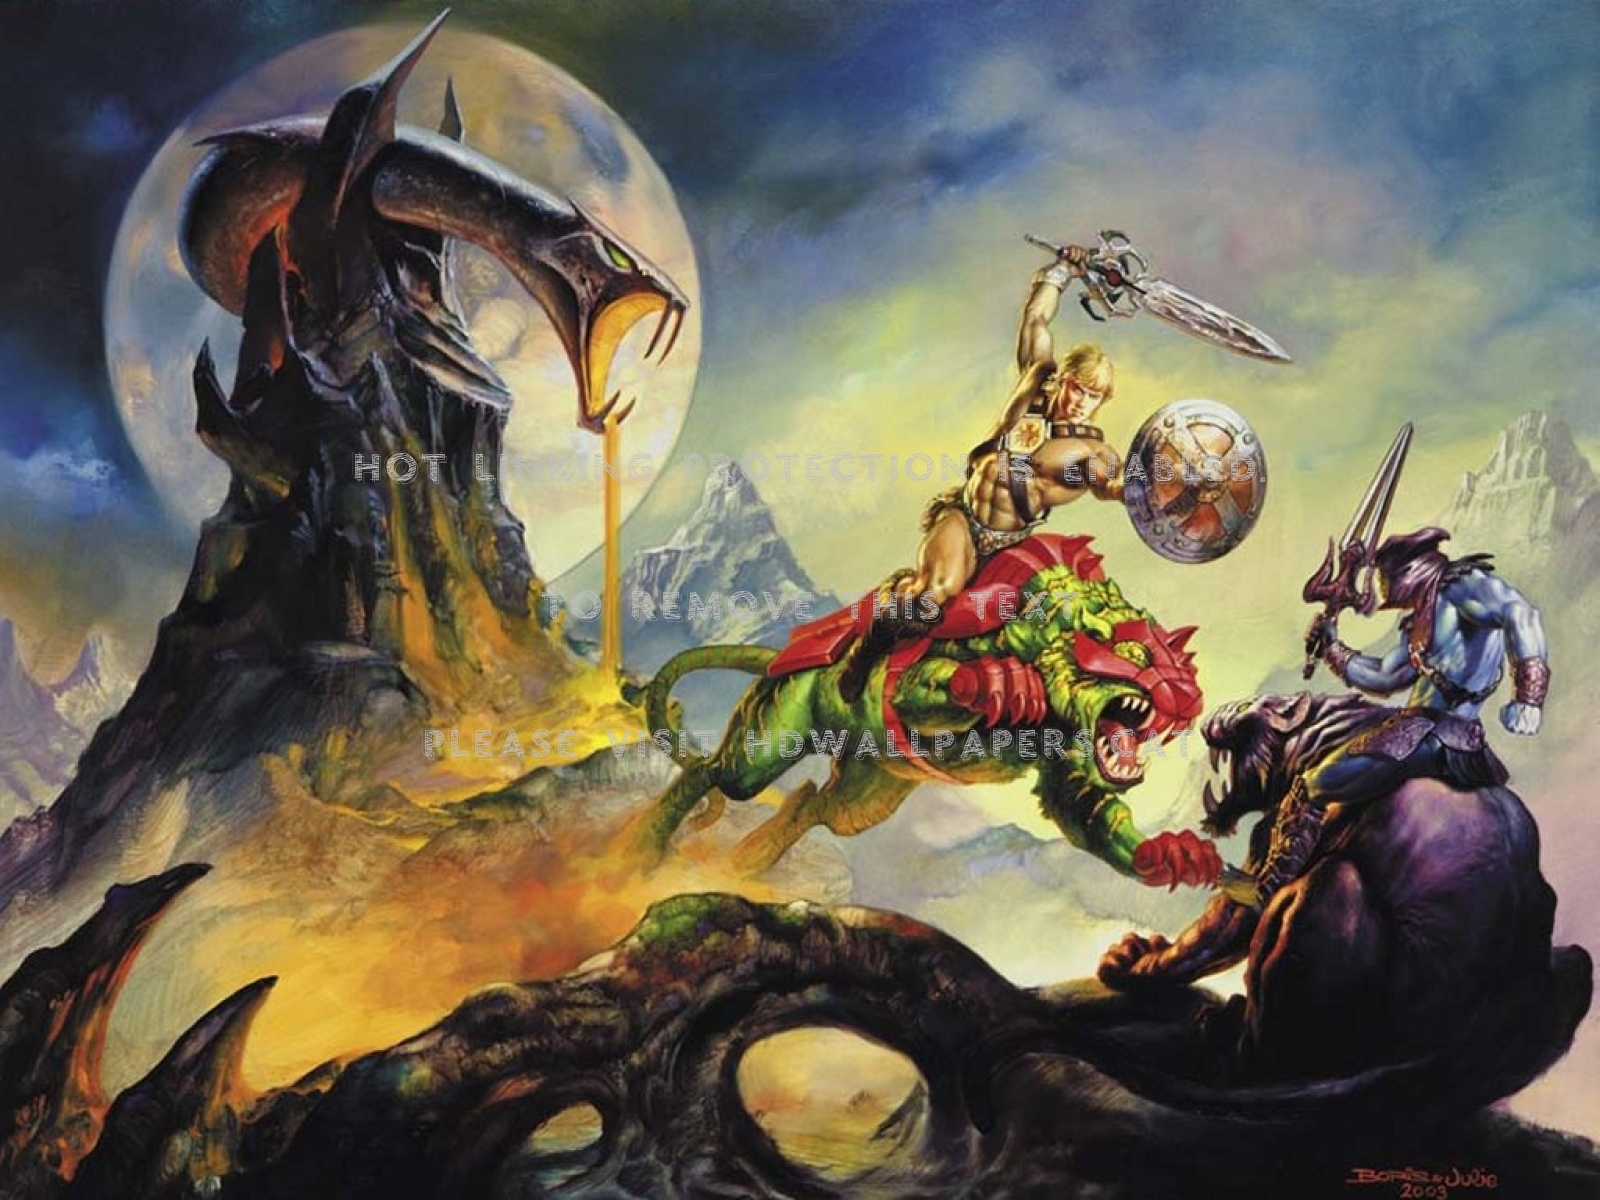 He-man And The Masters Of Universe - He Man Wallpaper Hd - HD Wallpaper 